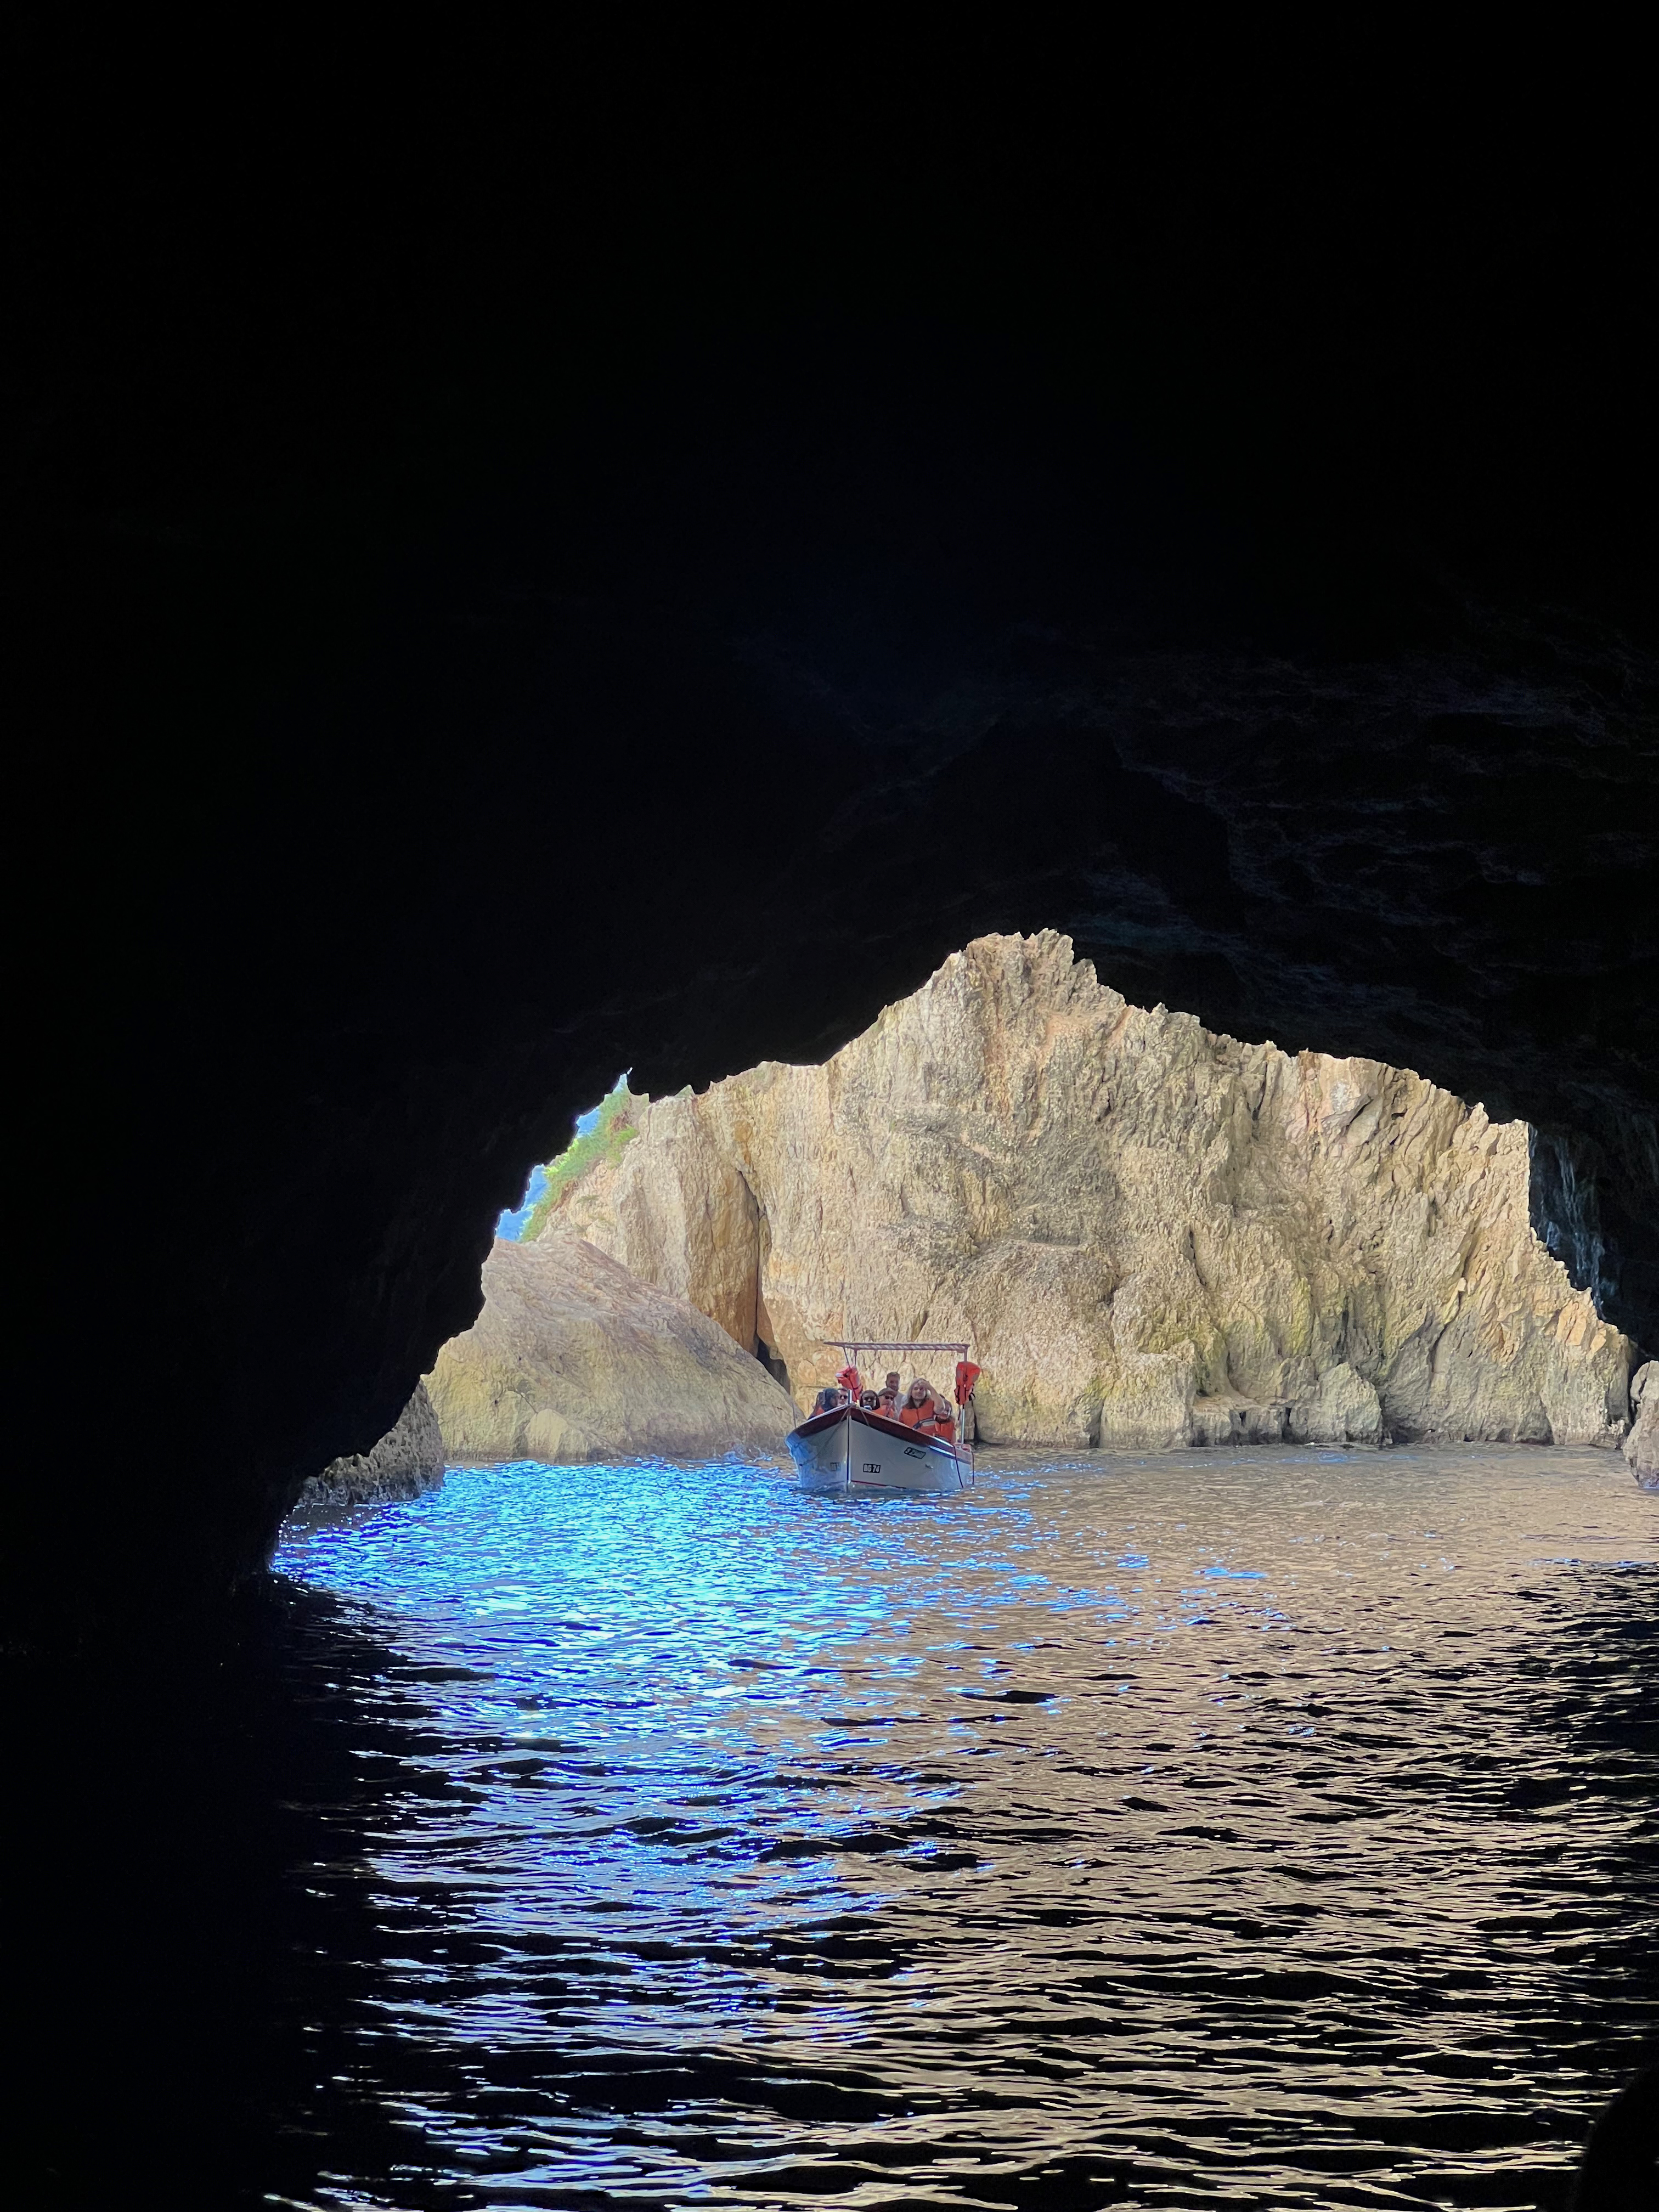 In the blue grotto